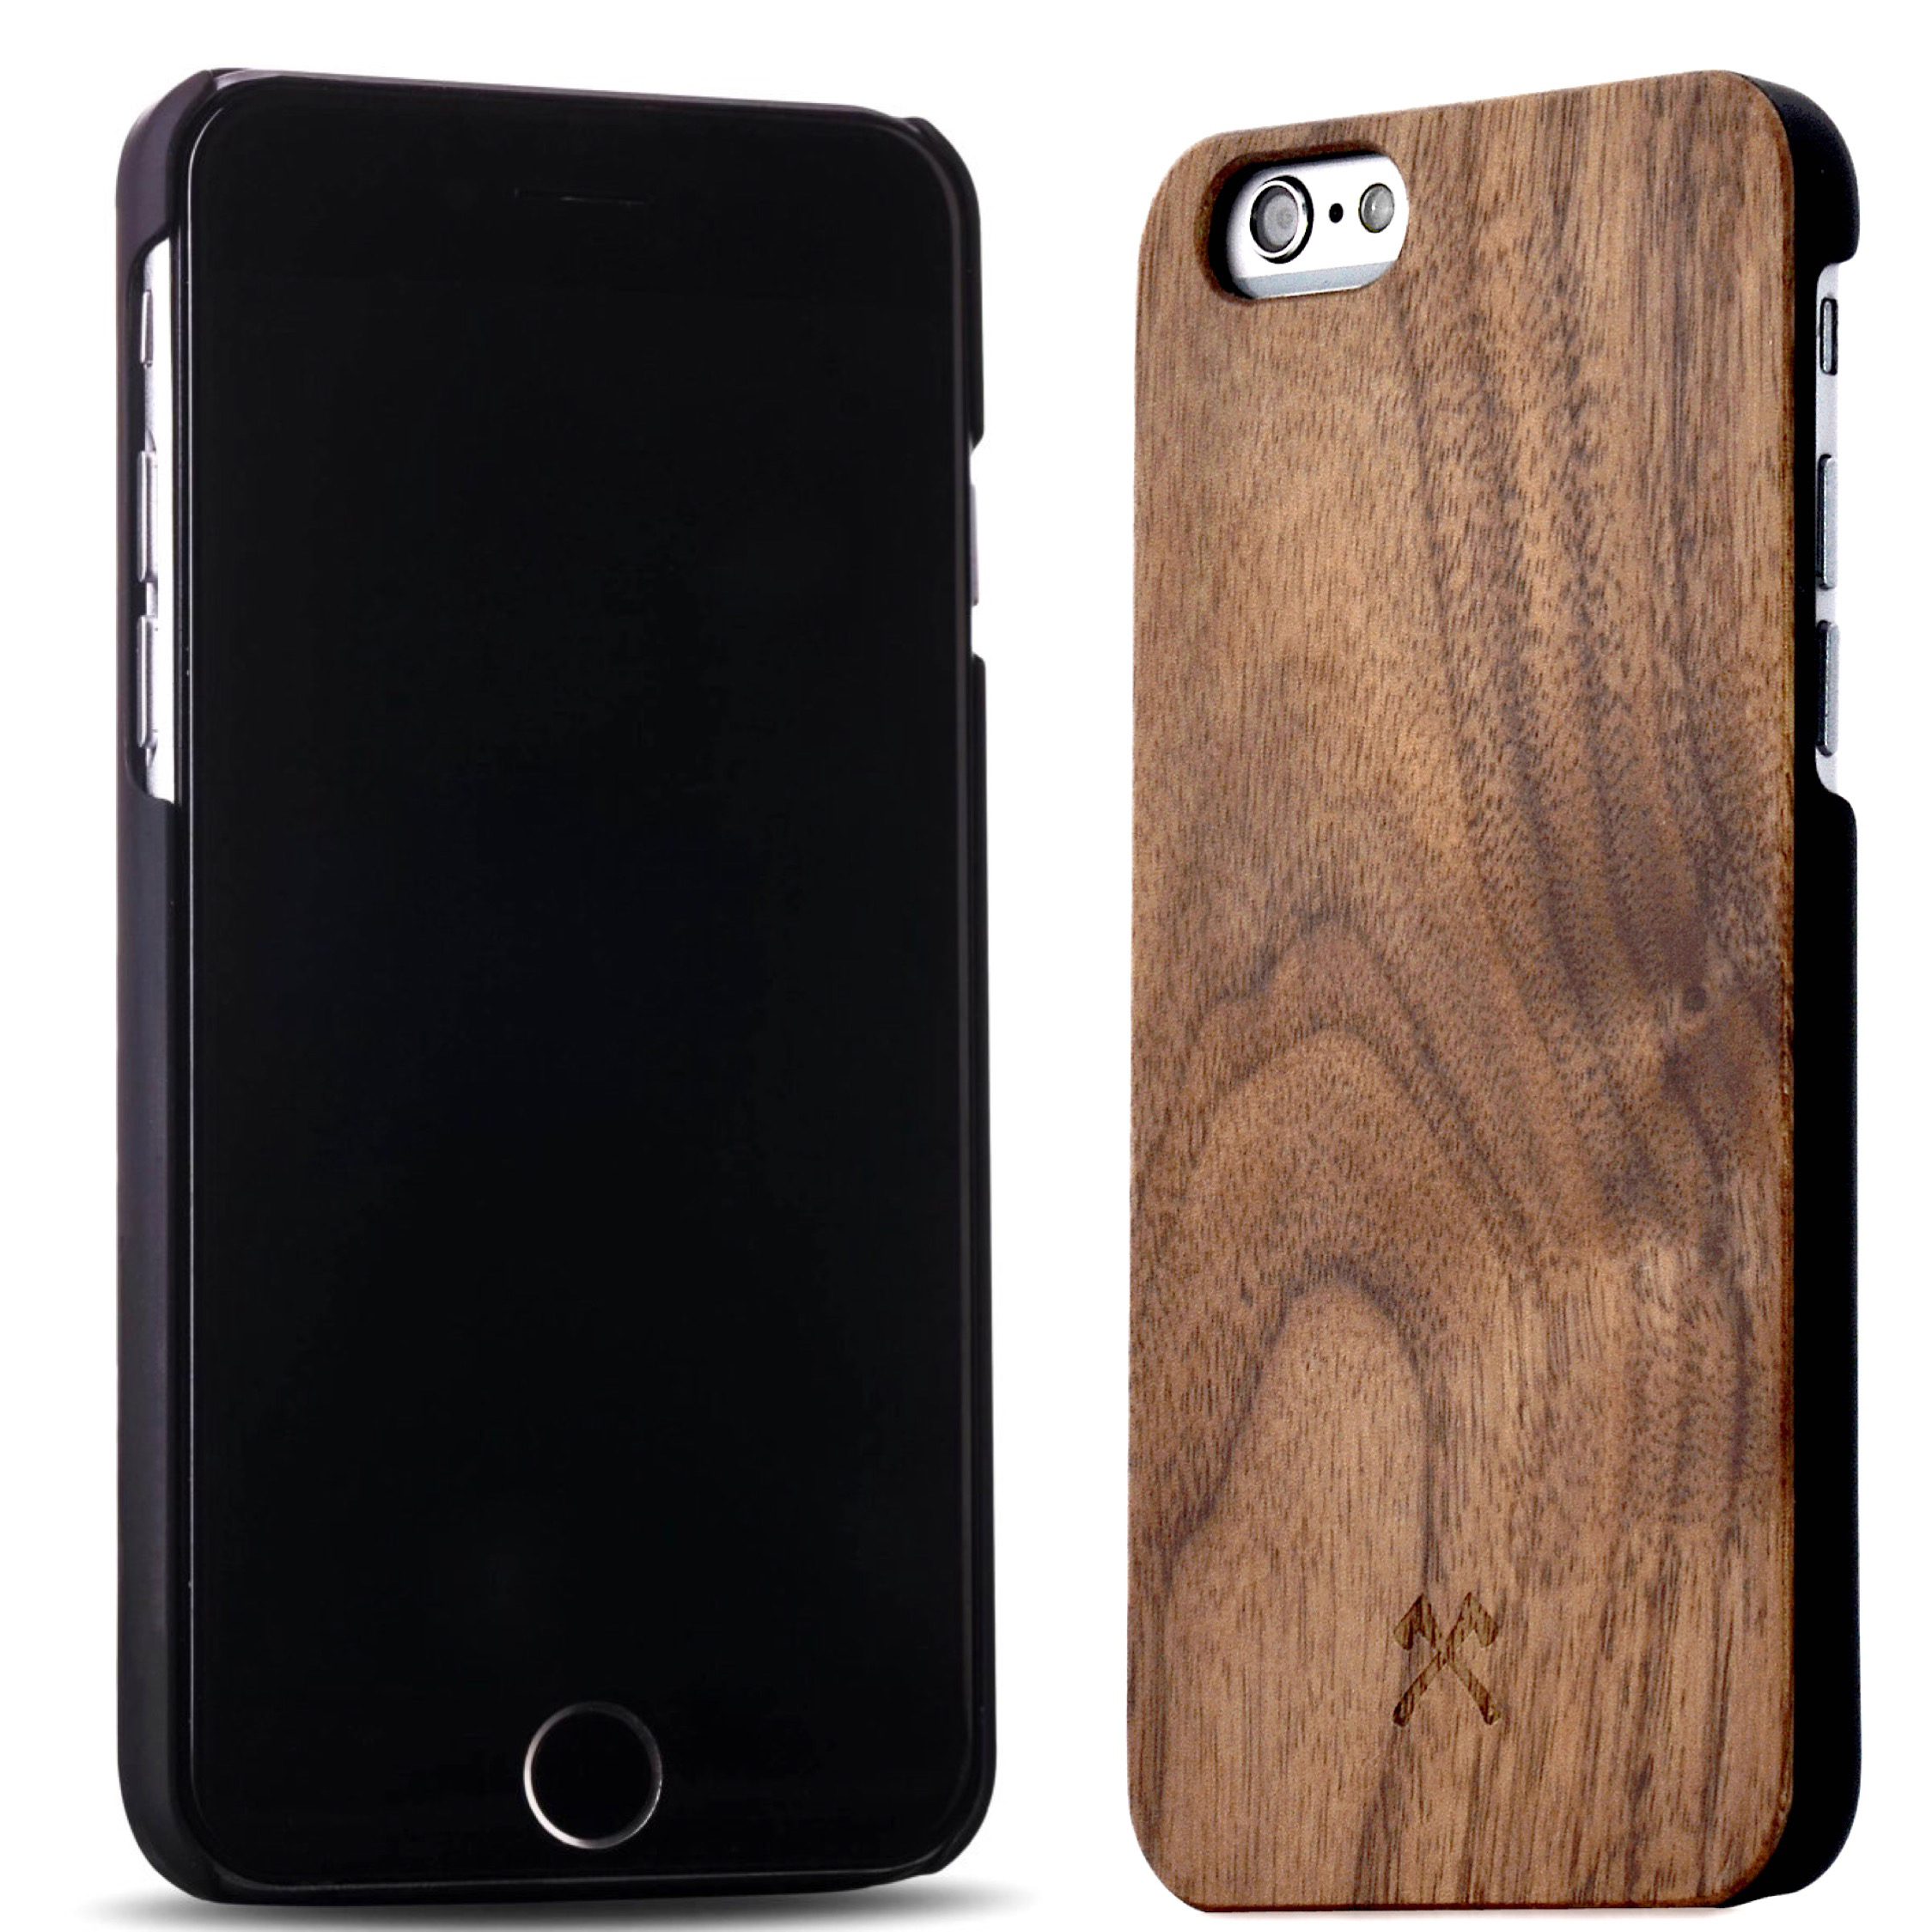 WOODCESSORIES EcoCase Classic, Apple, 6s, Walnuss/Schwarz Backcover, iPhone 6, iPhone